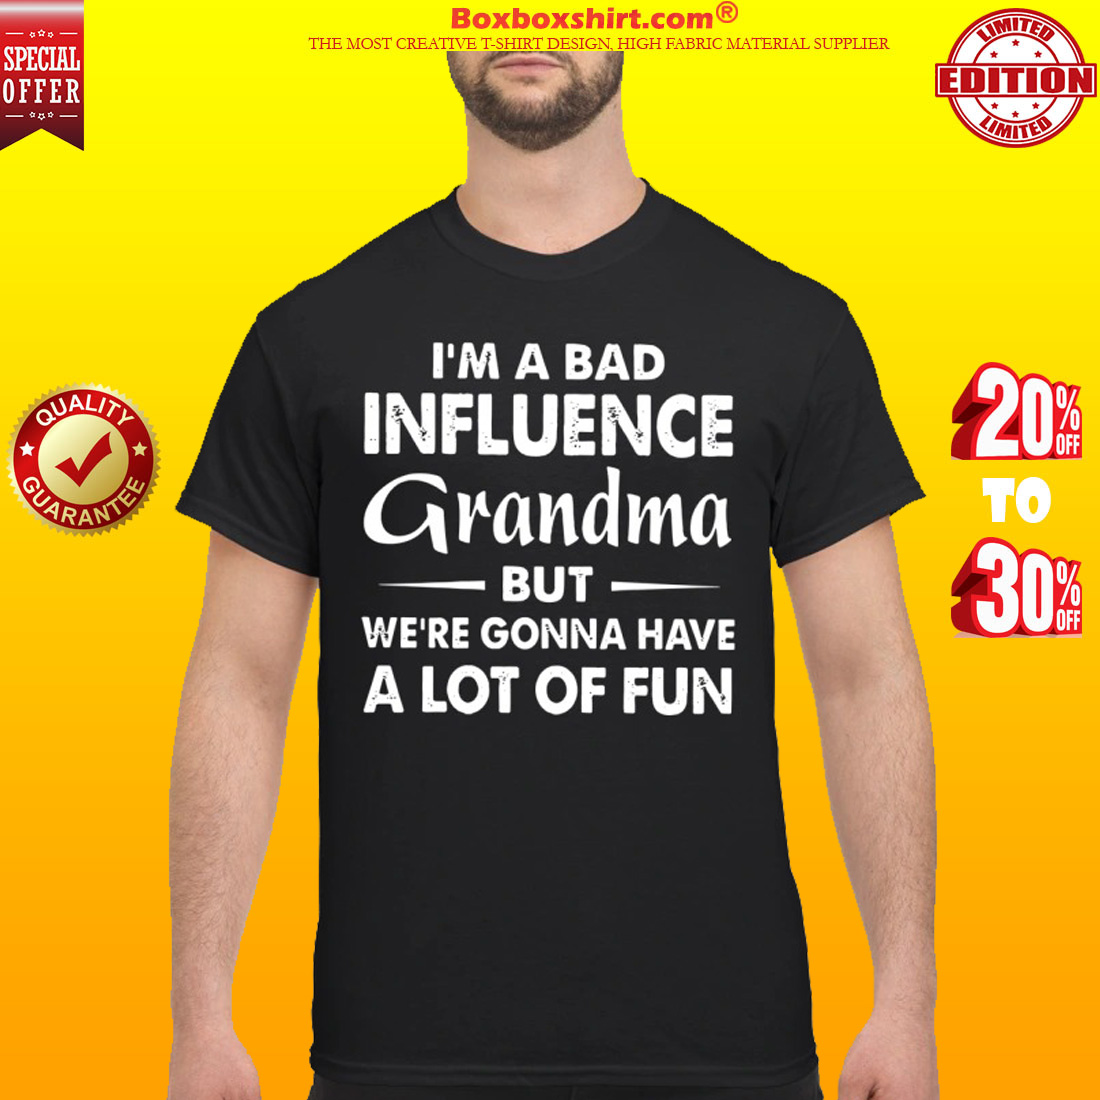 I'm a bad influence grandma but we're gonna have a lot of fun classic shirt